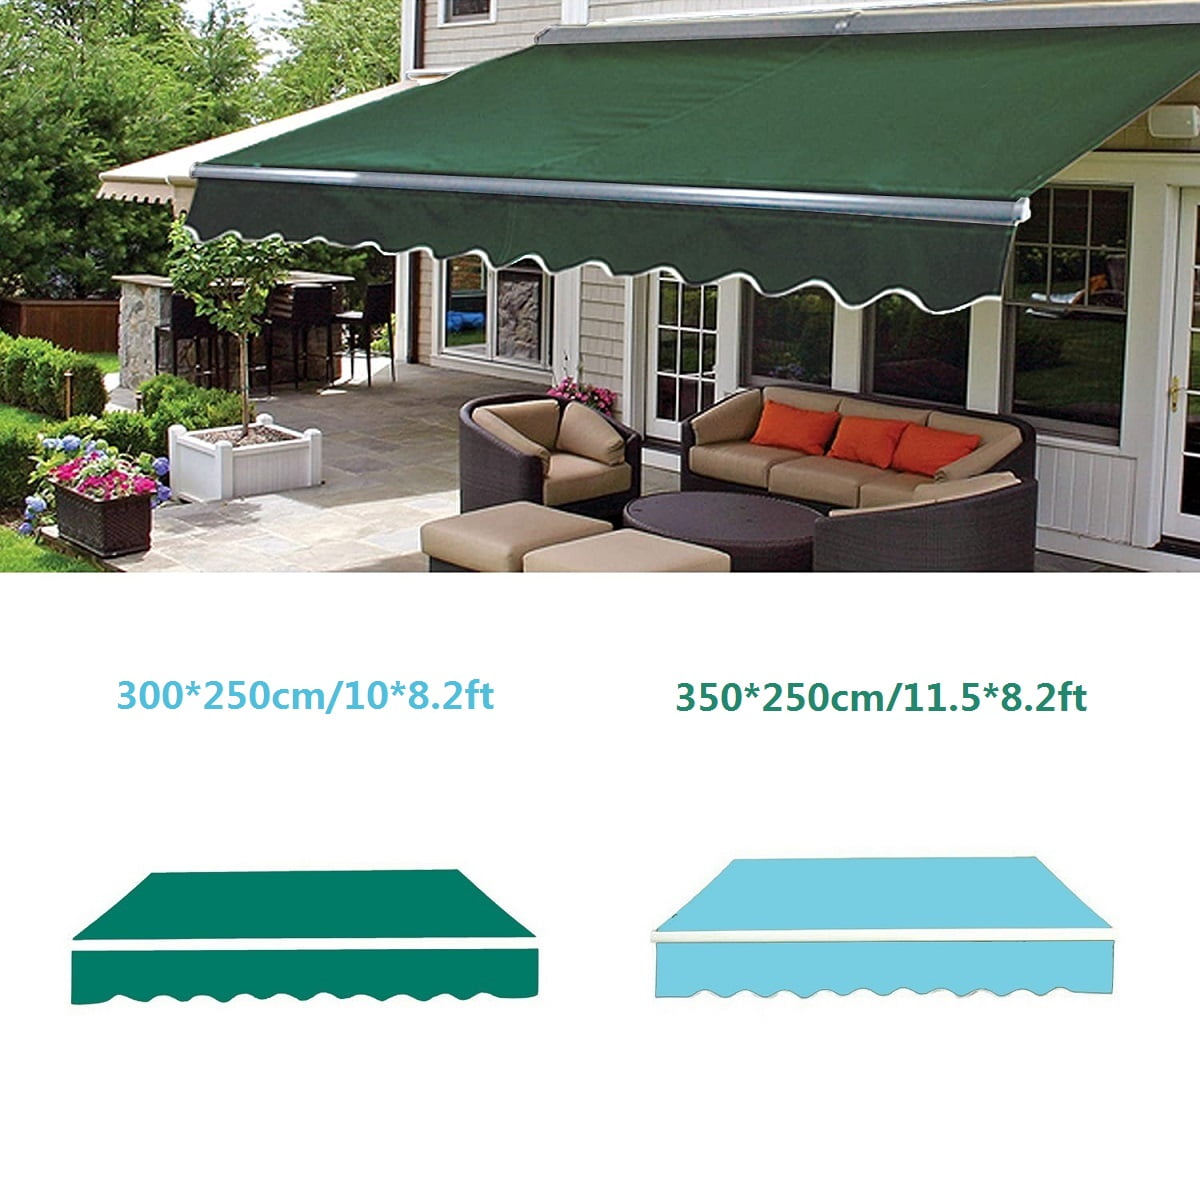 ALEKO Fabric Replacement For 10x8 Ft Retractable Awning Green Color